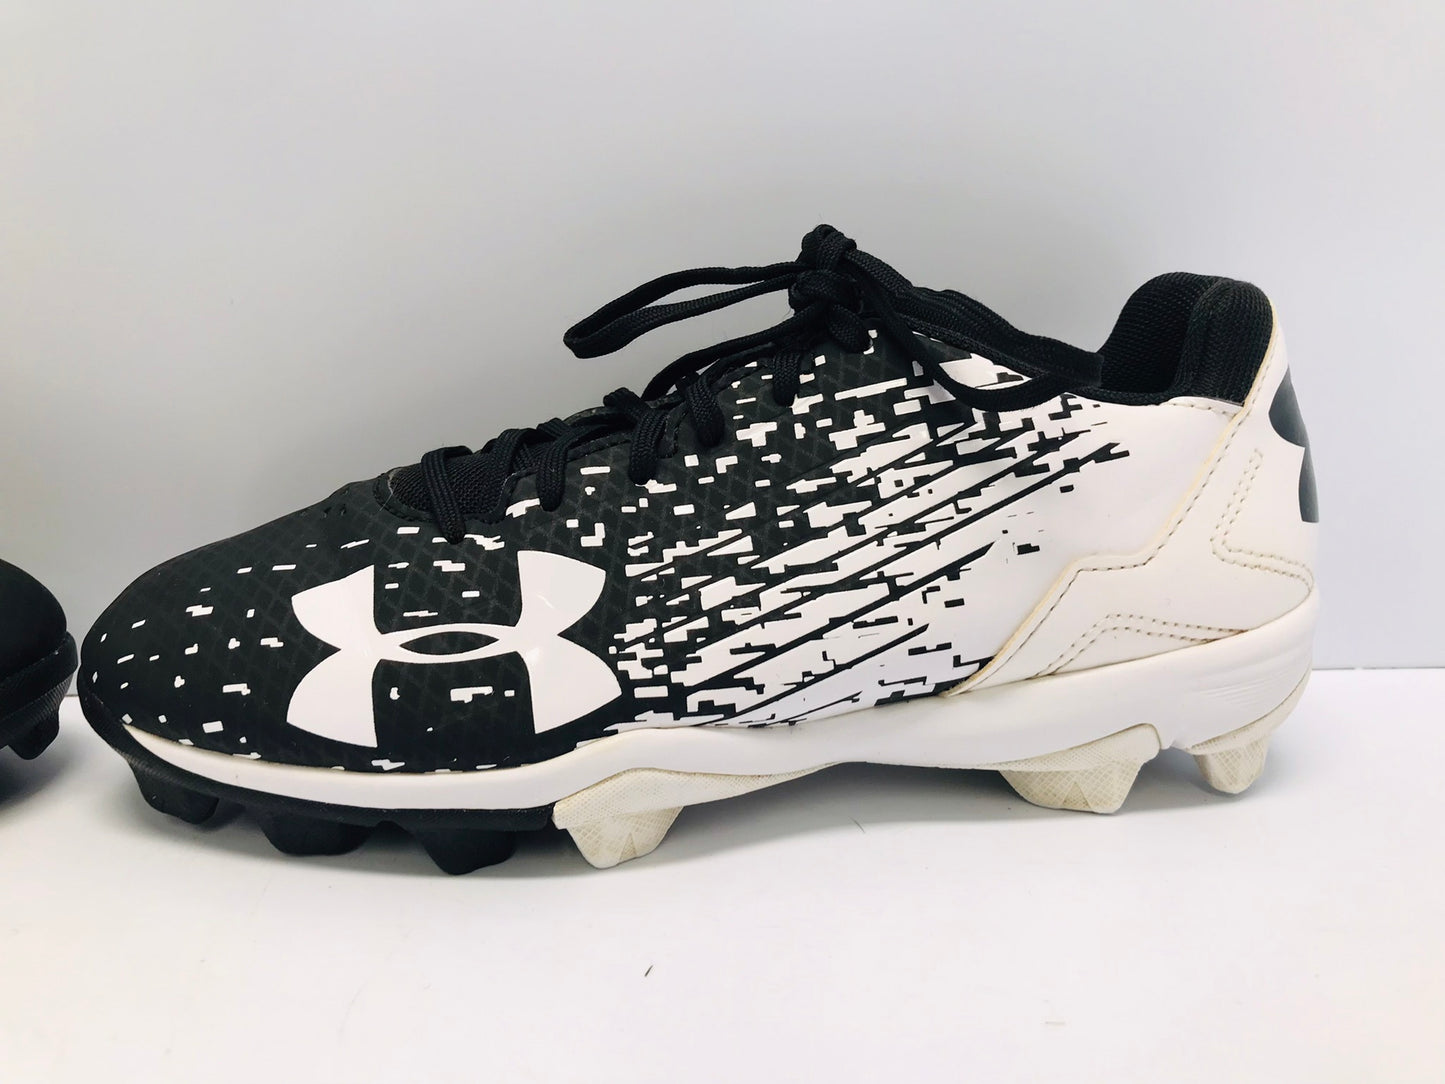 Baseball Shoes Cleats Child Size 4 Under Armour  Black White Like New